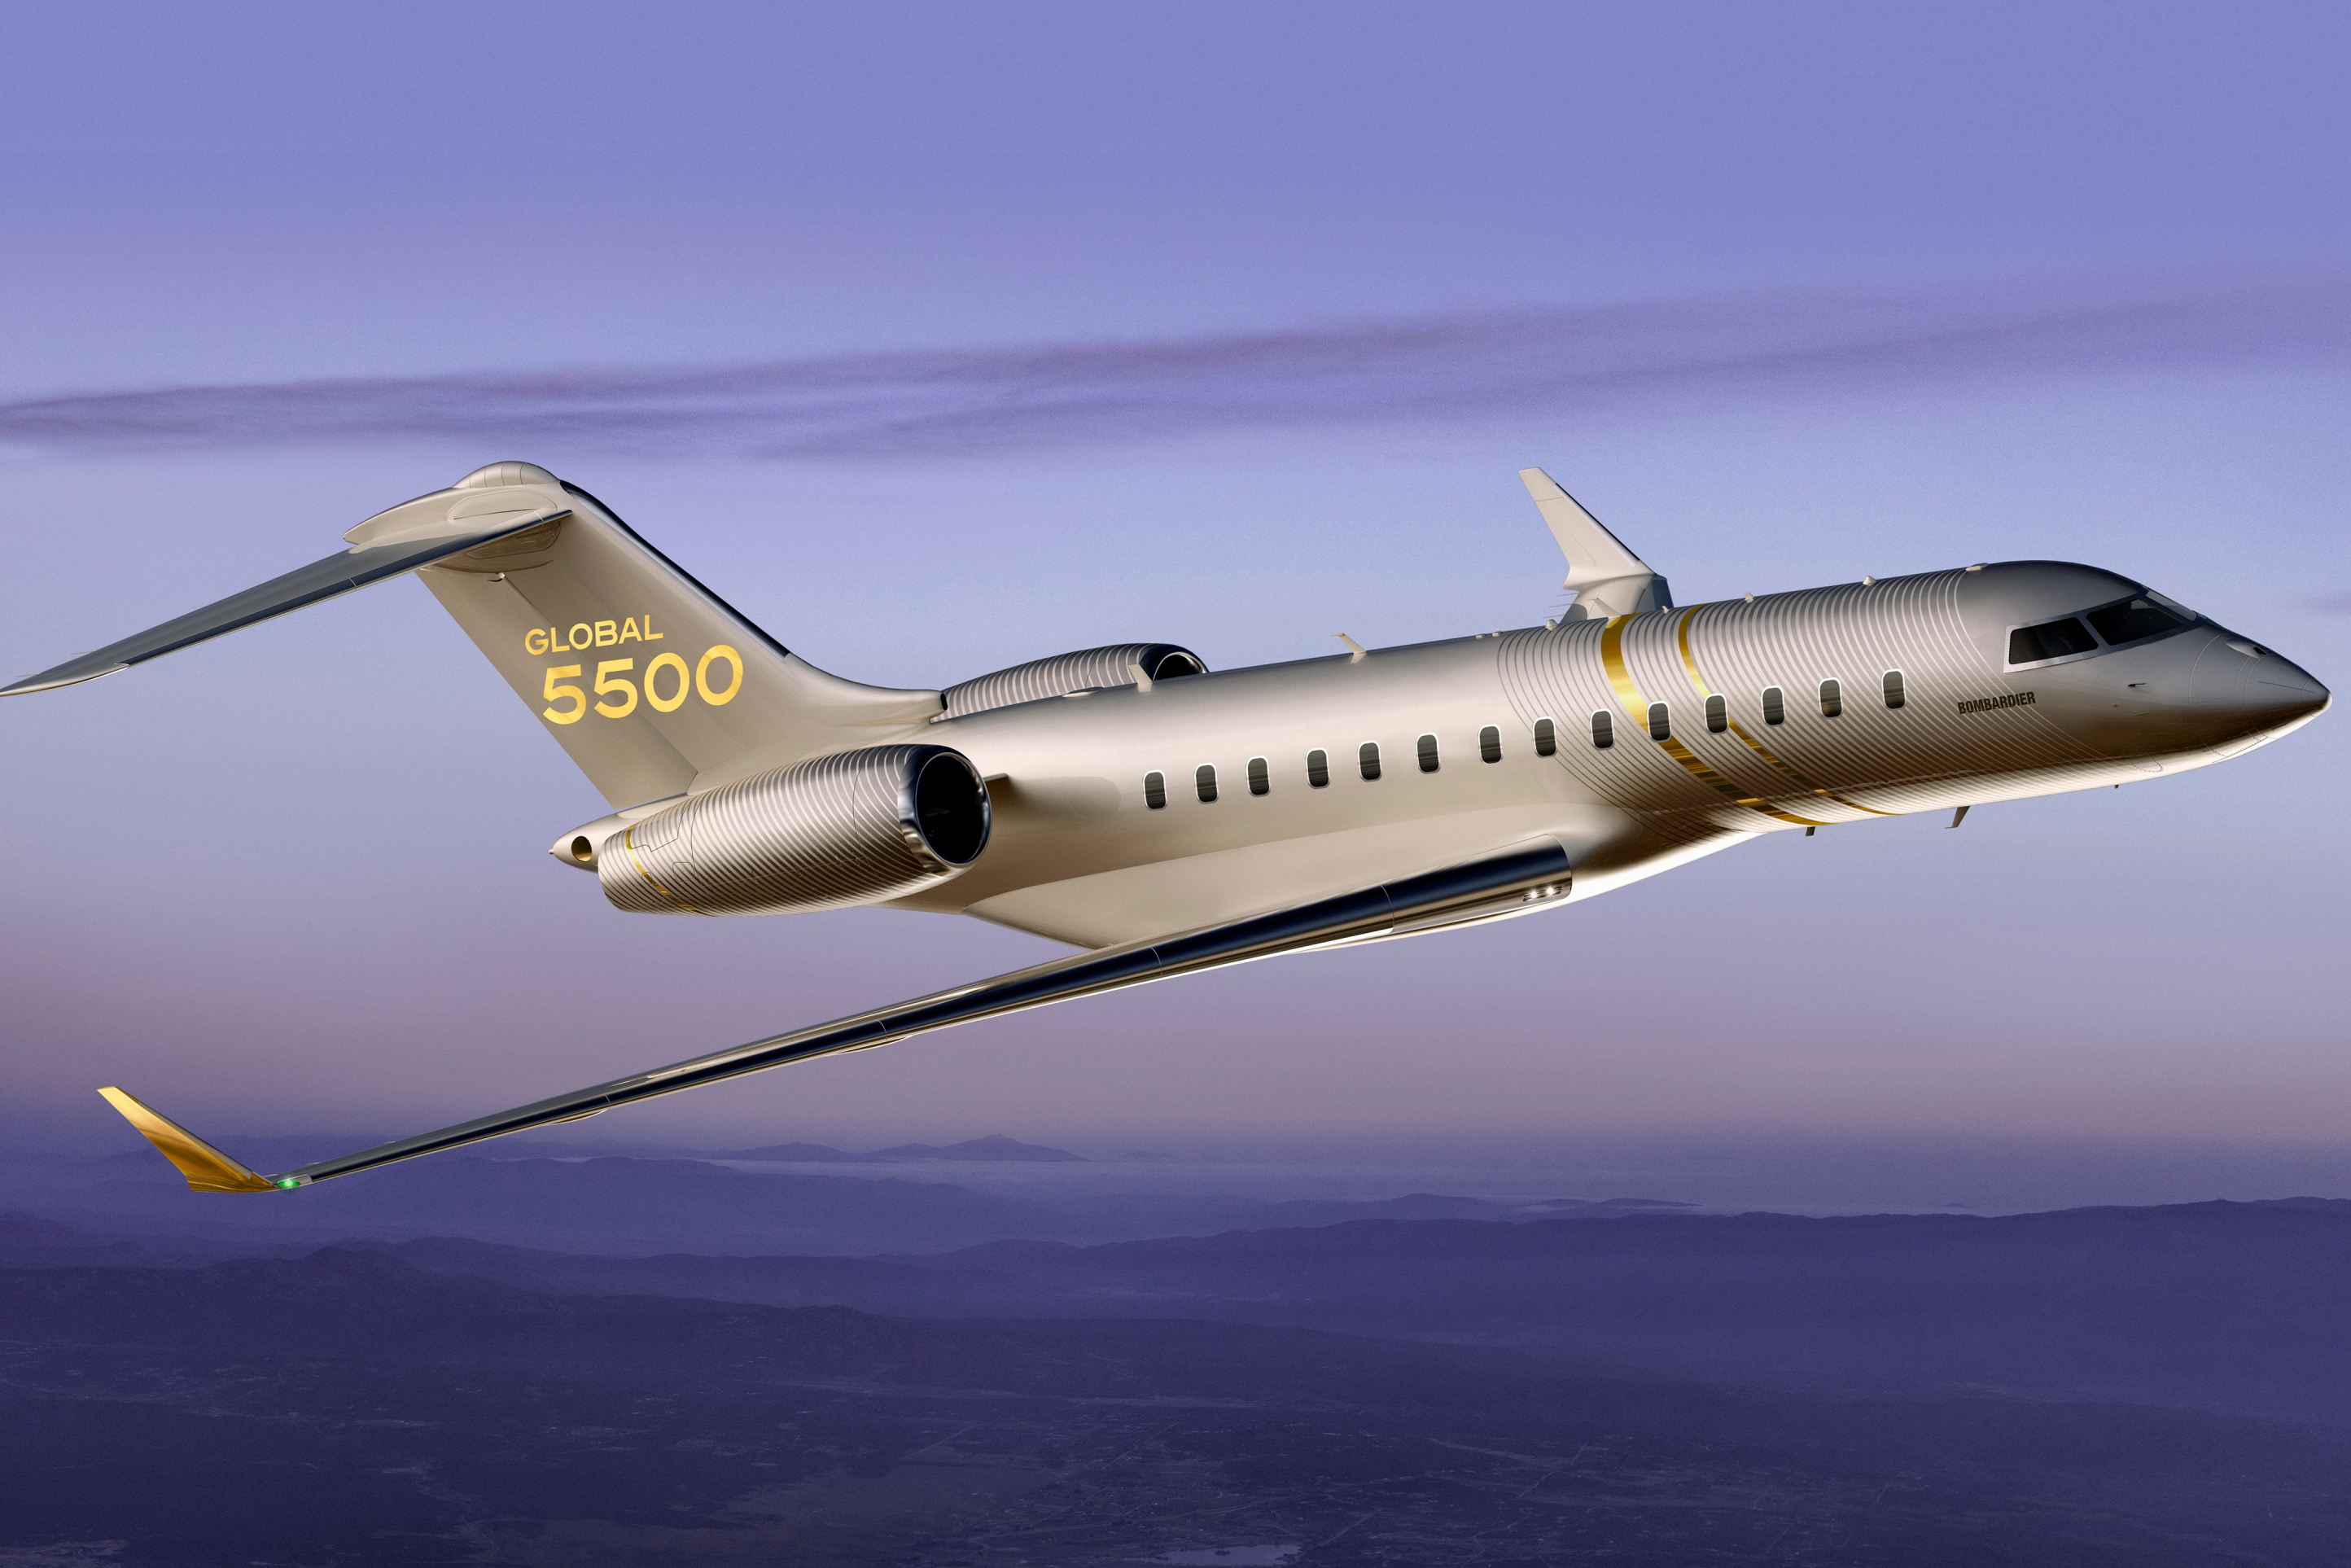 Bombardier has delivered the first Global 5500 business jet to an undisclosed customer. The aircraft represents the gateway into Bombardier’s flagship large-cabin Global family, and has a range of 5,900 nautical miles, 200 more than originally planned. Click to enlarge.